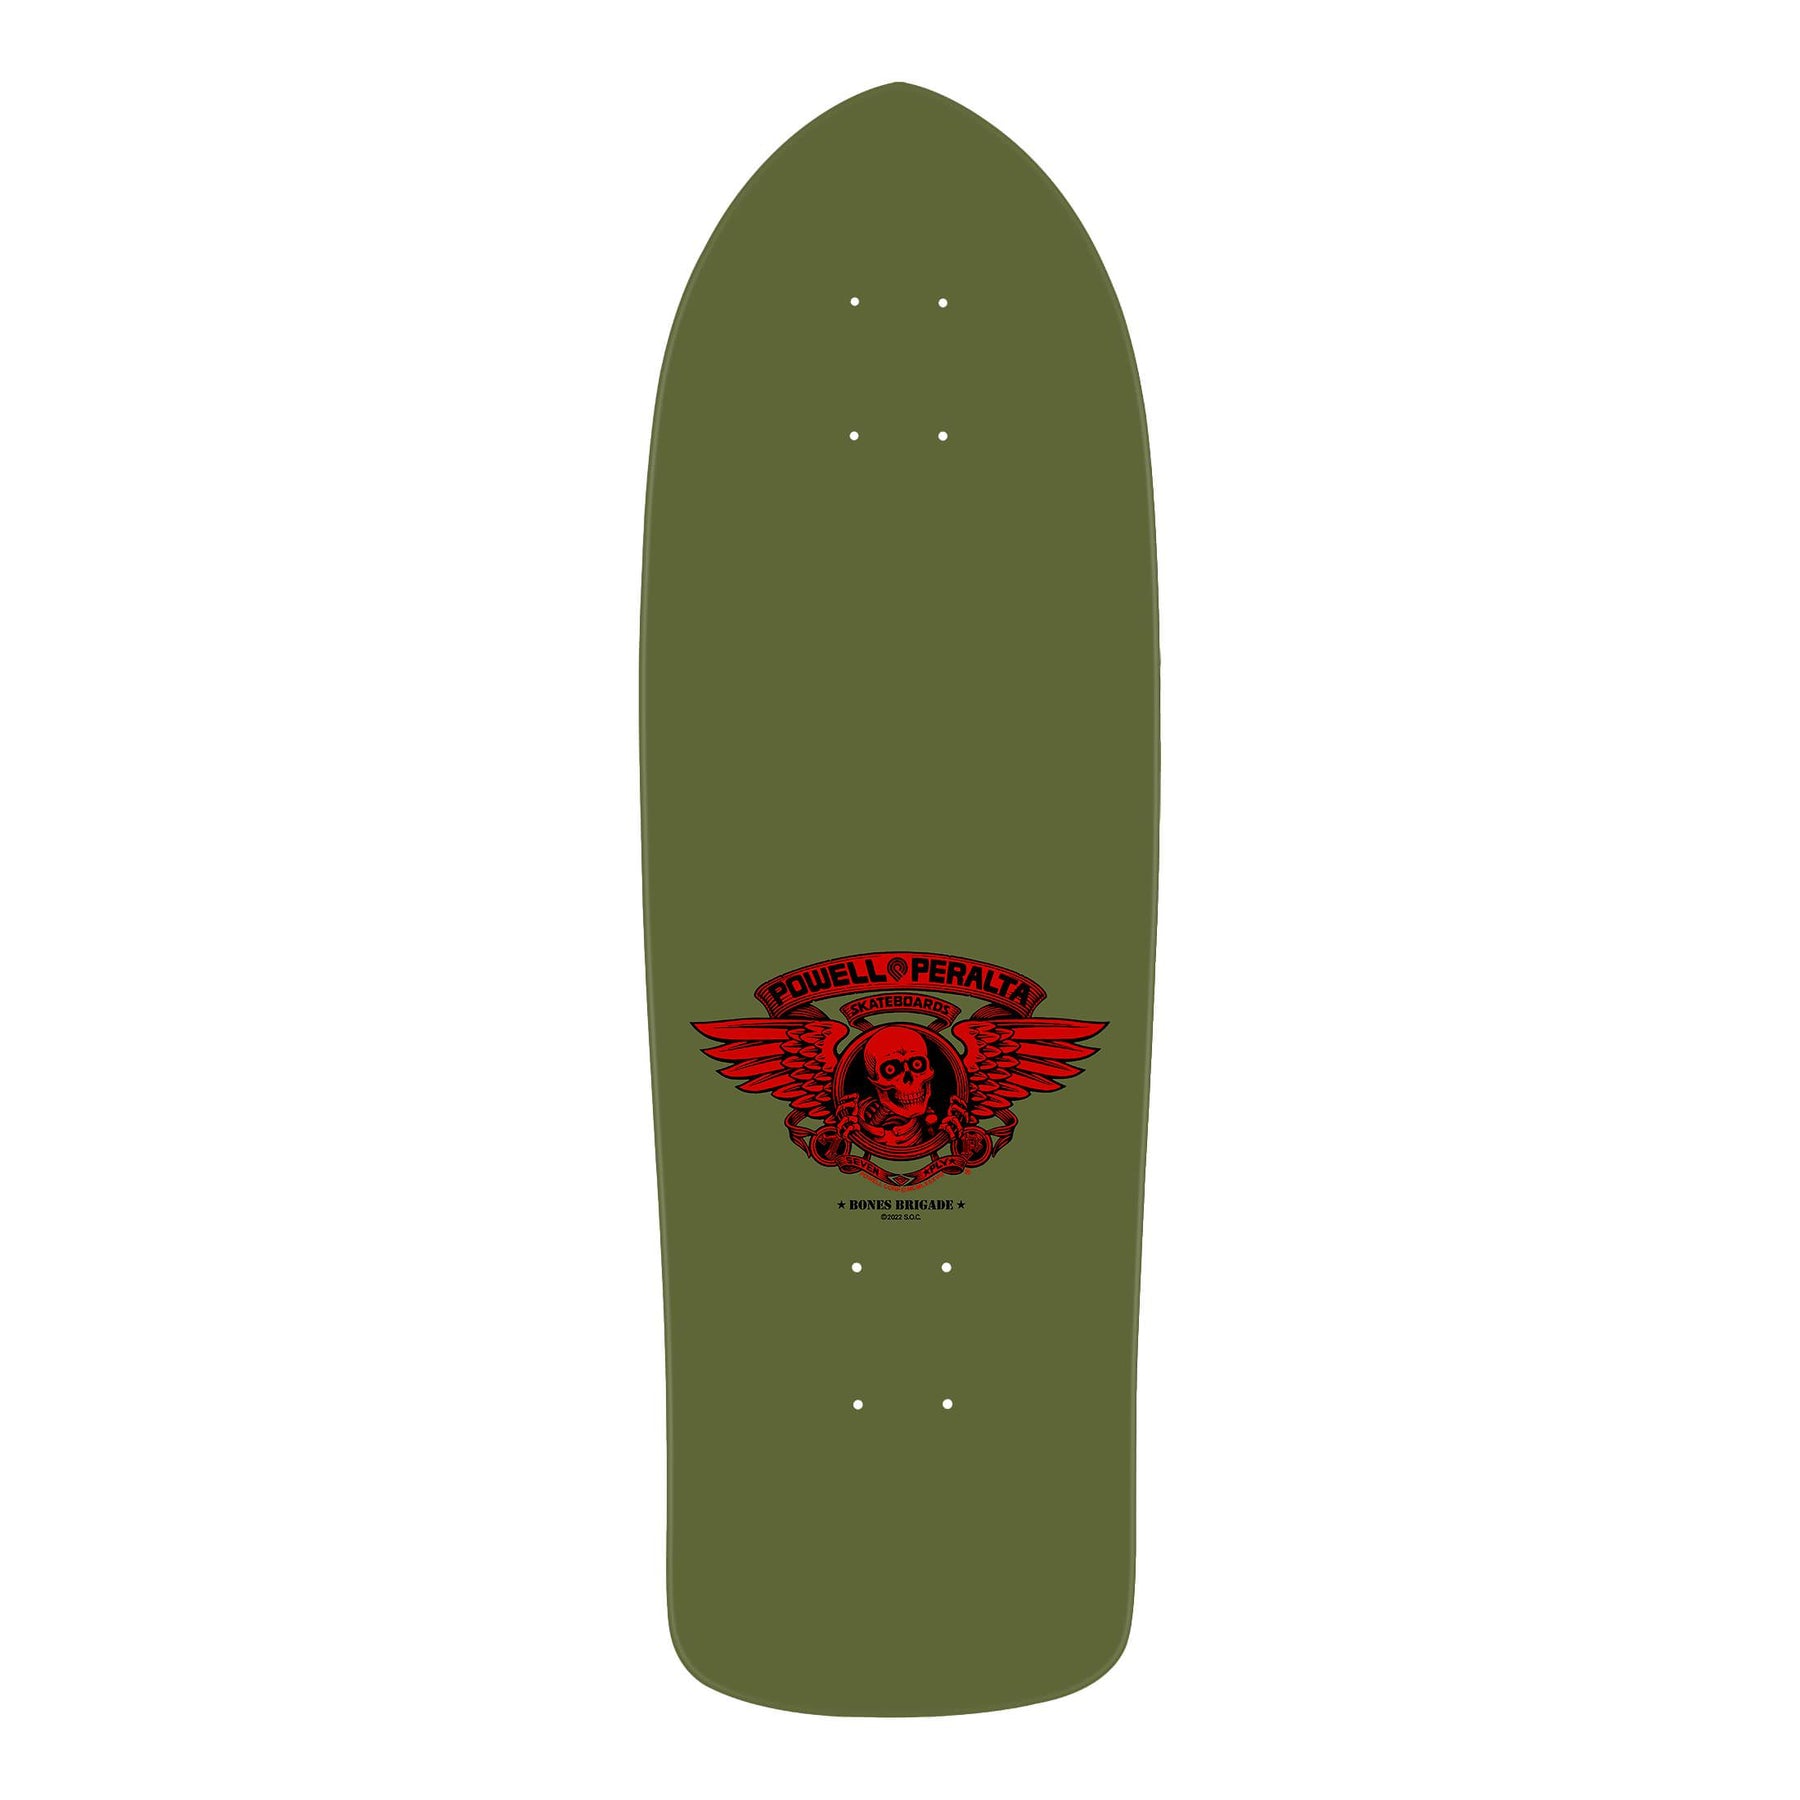 Powell-Peralta Re-Issue Limited Skateboard Decks, Series 13, Tommy Guerrero